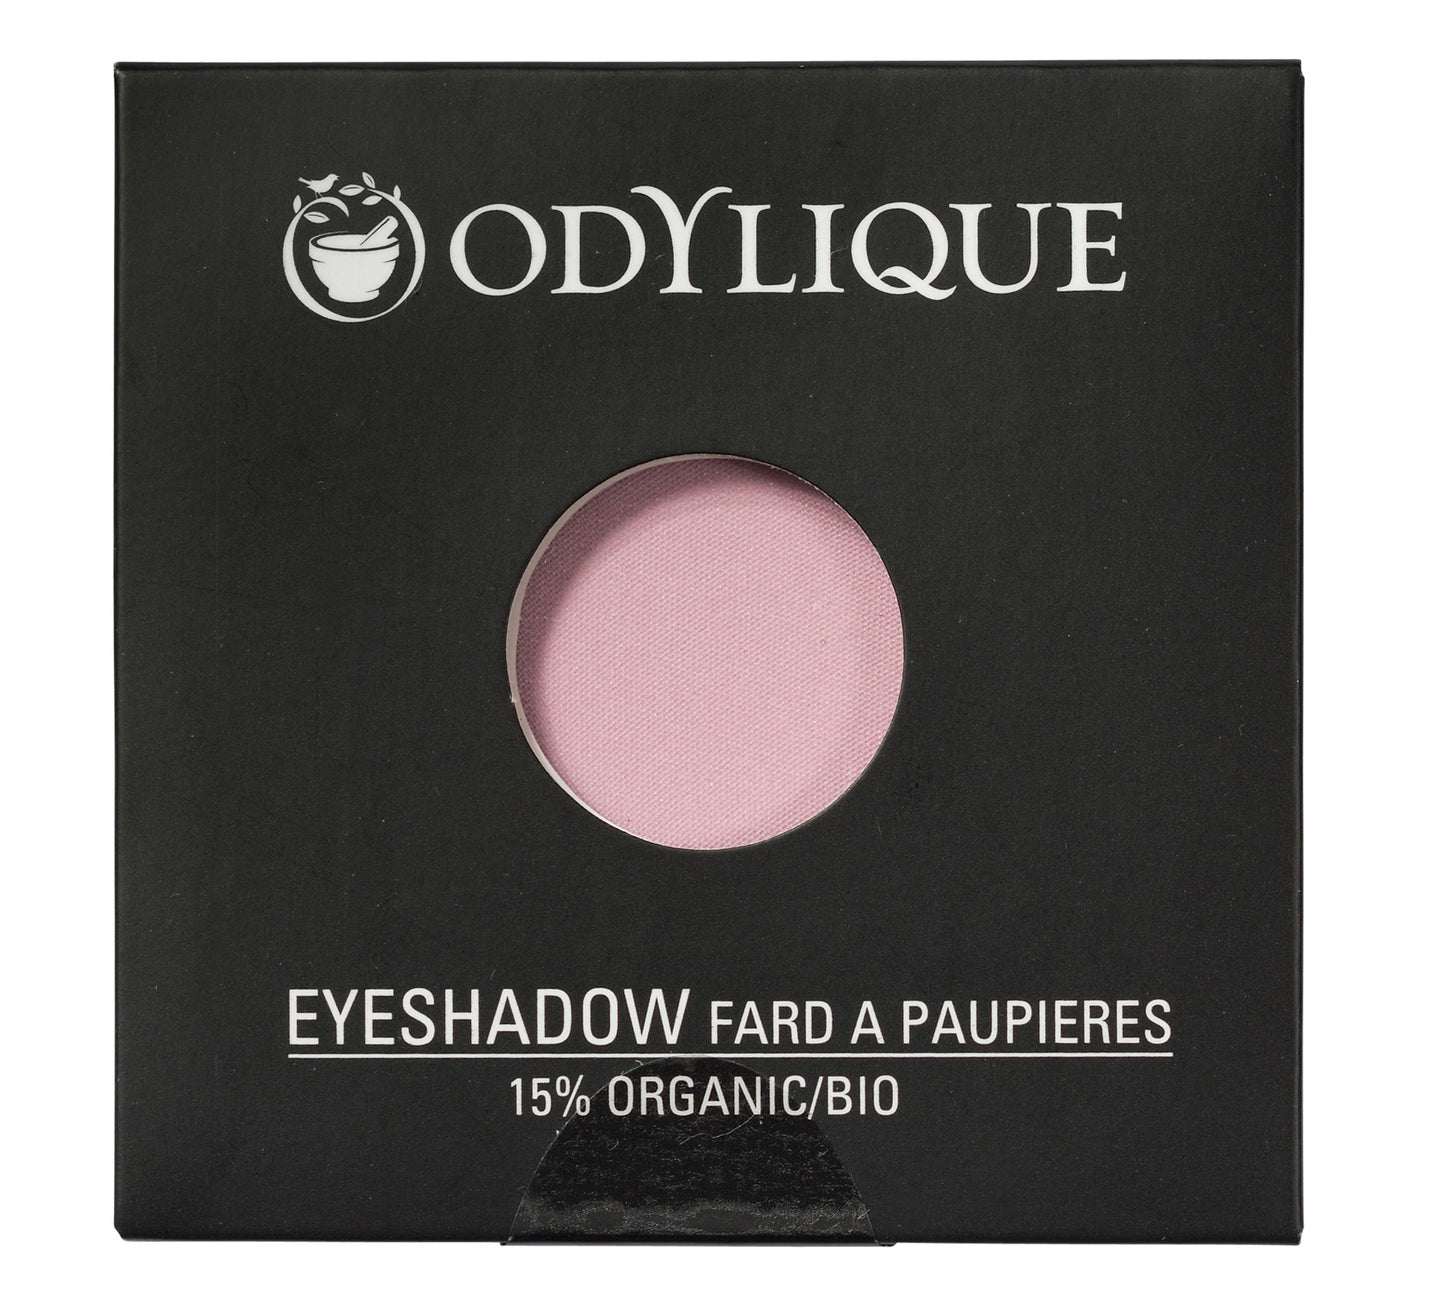 Single pan Odylique organic eyeshadow in shade Shell, placed in its black packaging.